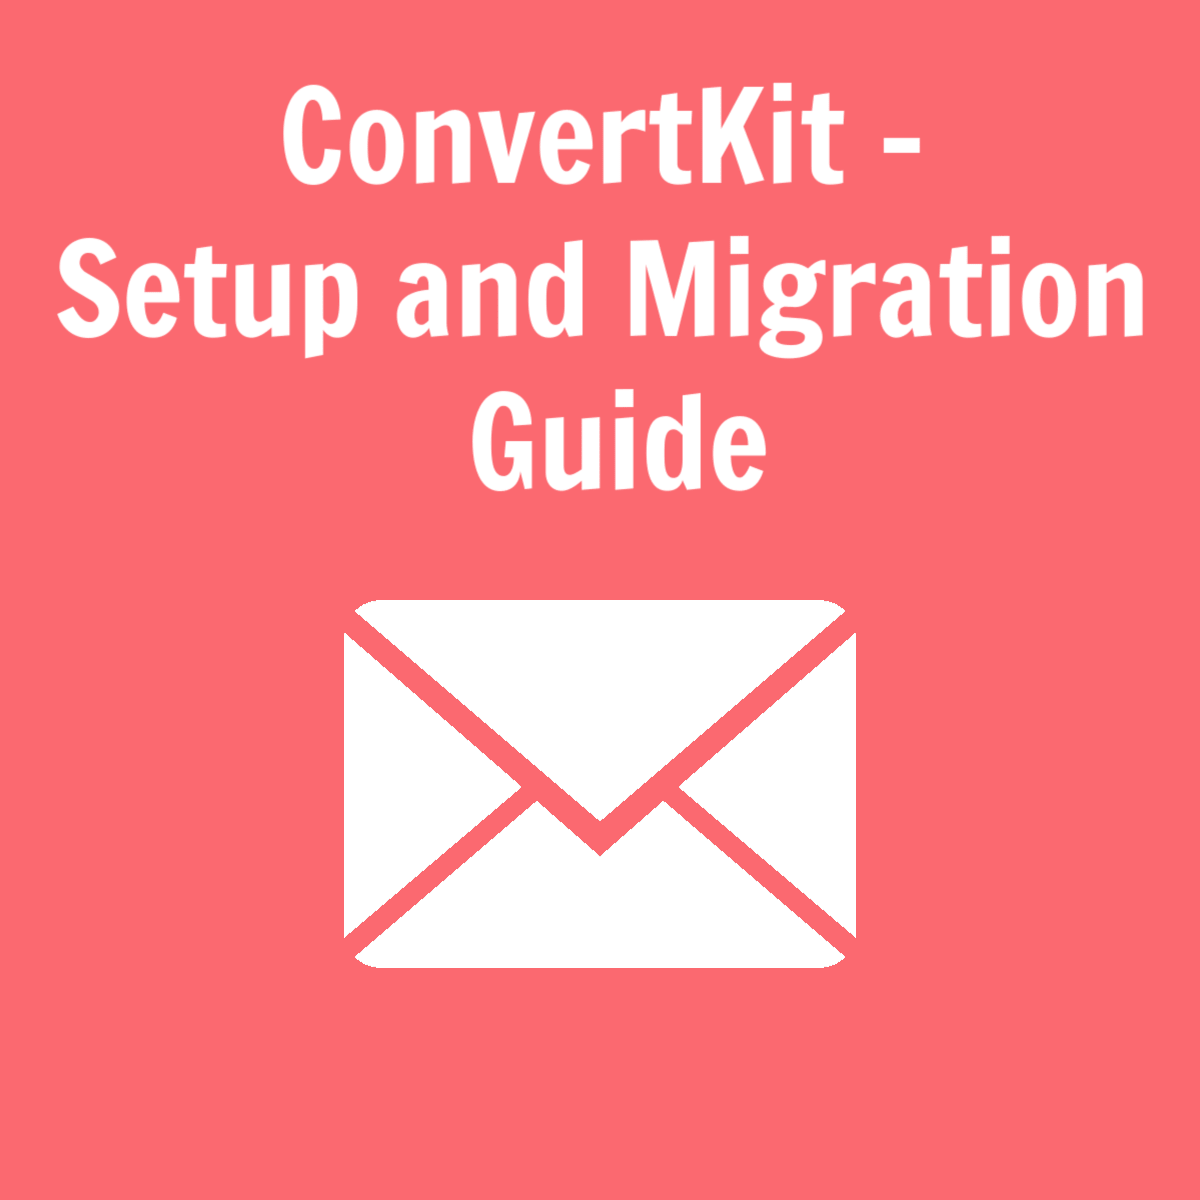 convertkit setup and migration guide featured image